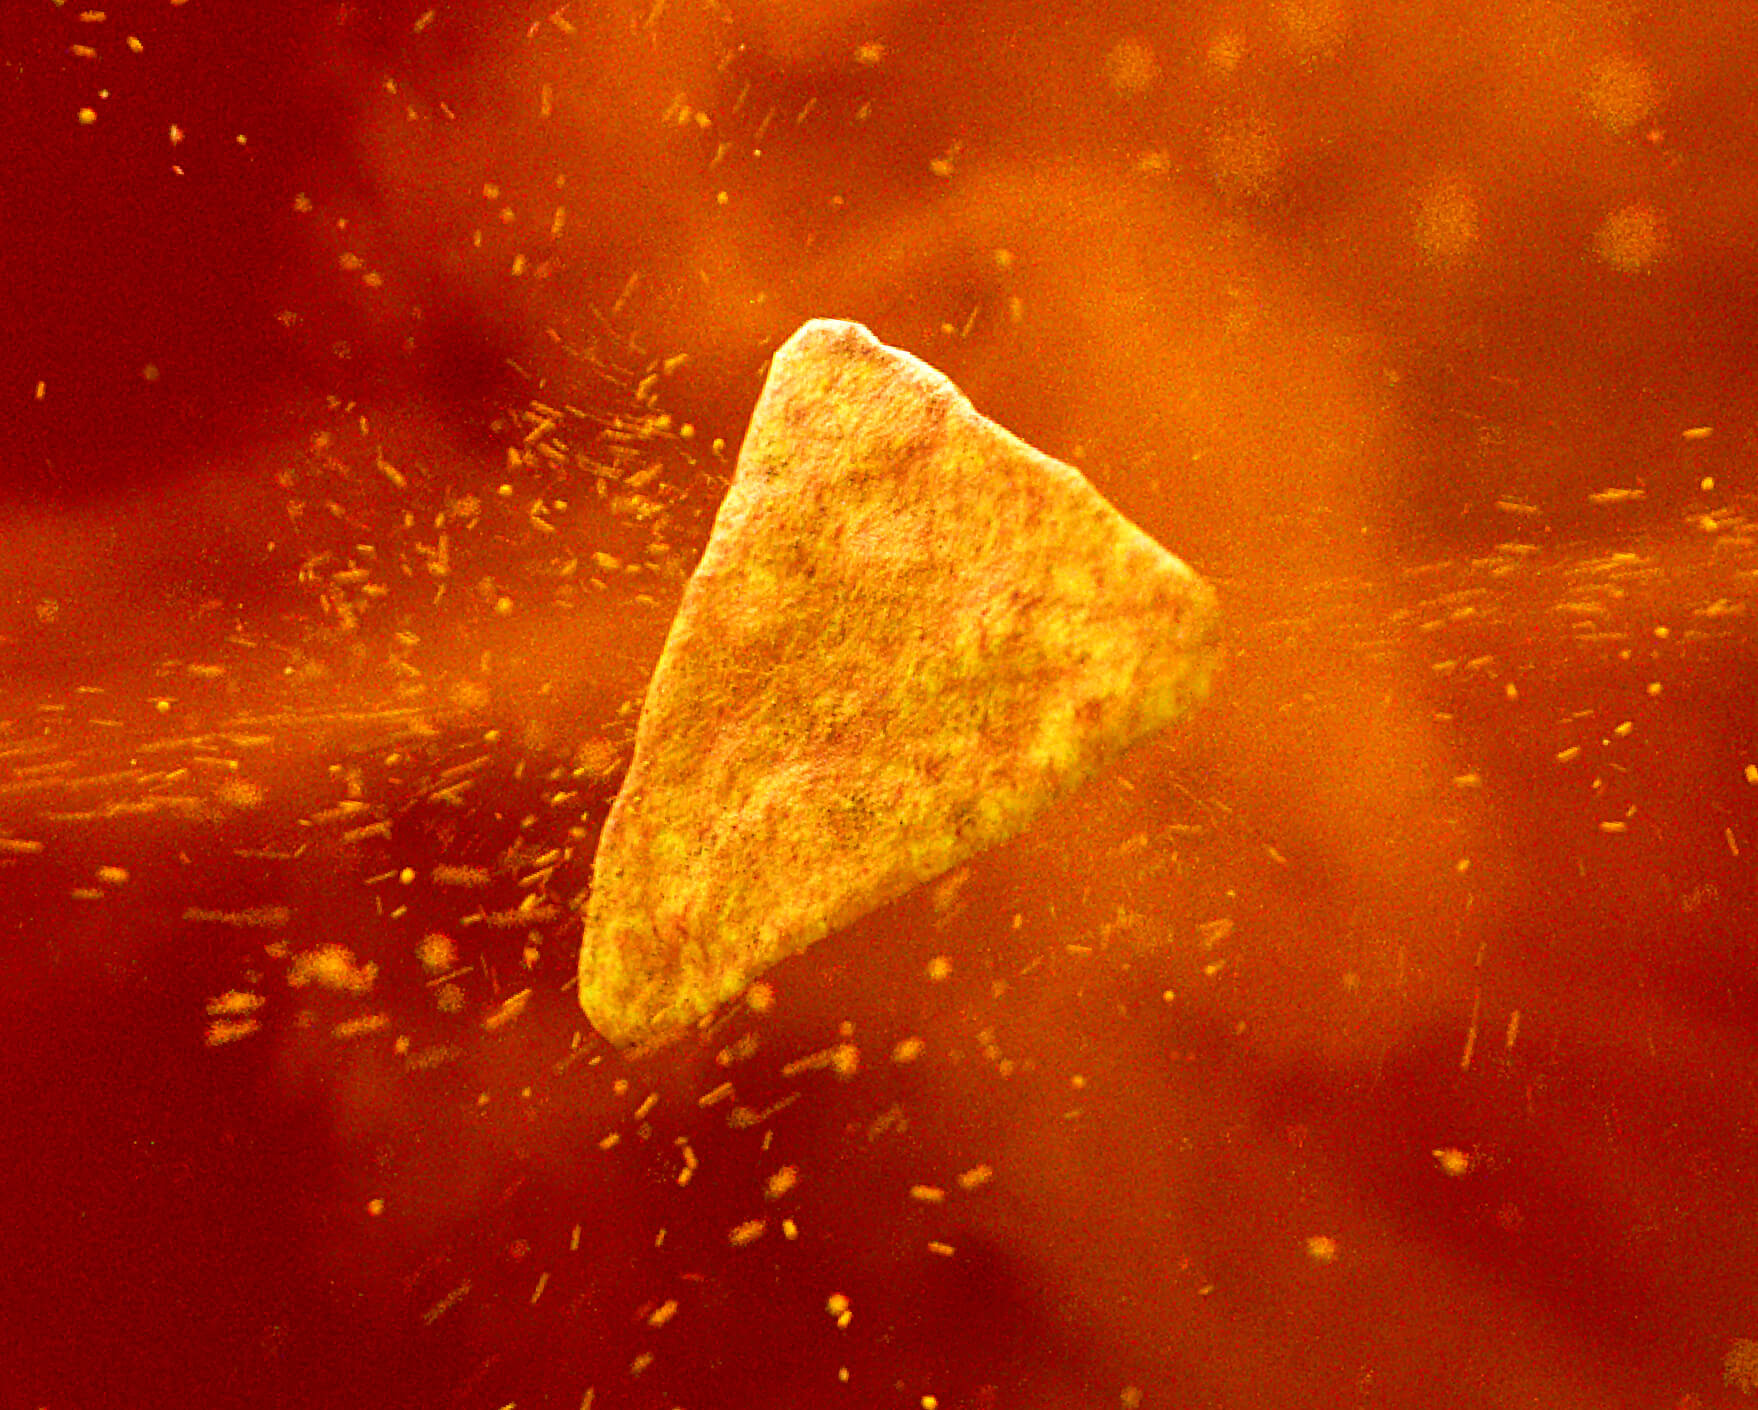 Doritos — “Try Another Angle”